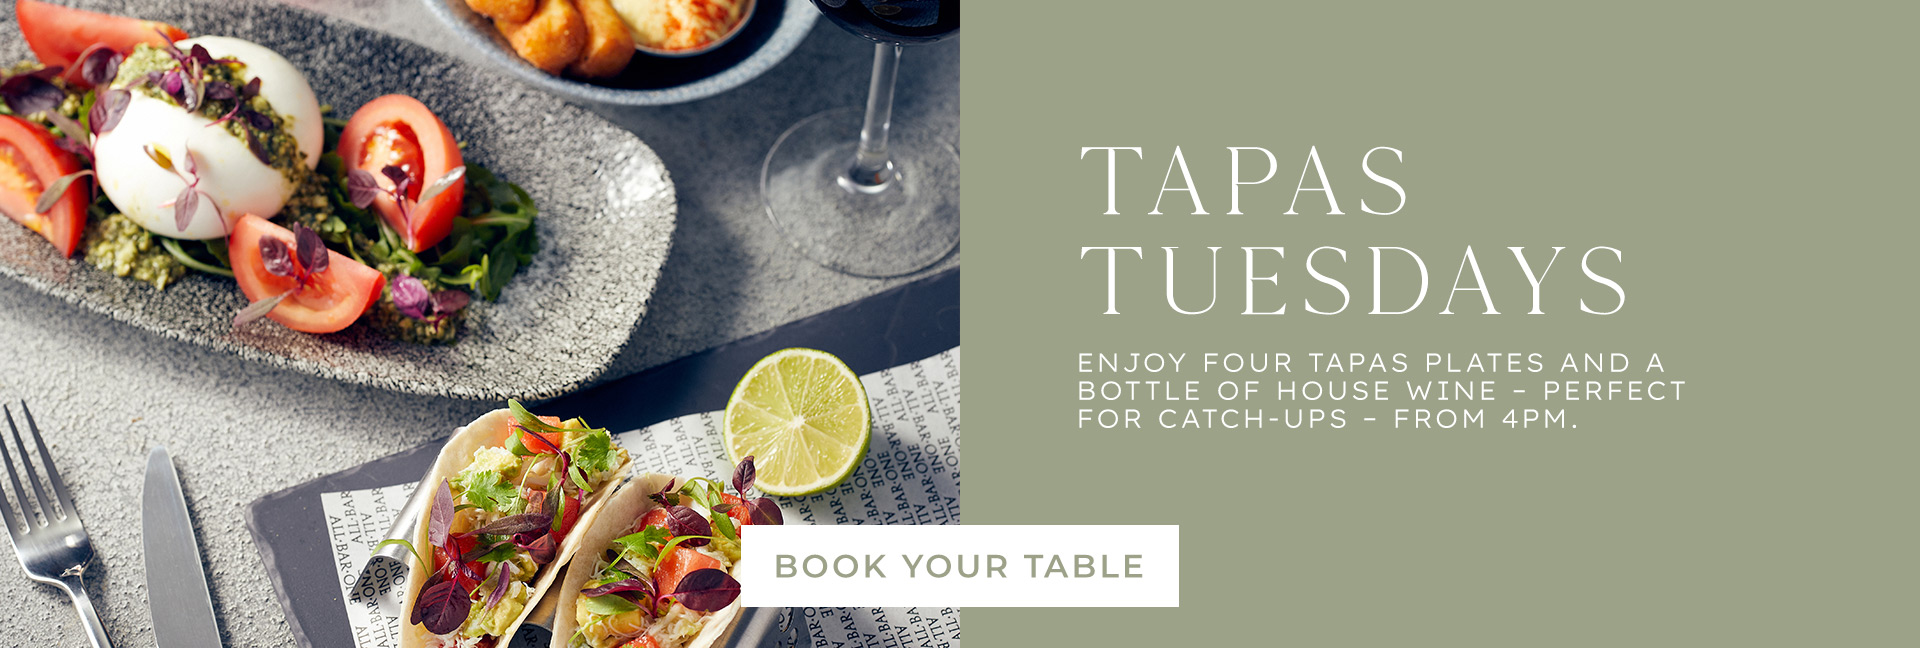 Tapas Tuesday at All Bar One Manchester - Book now